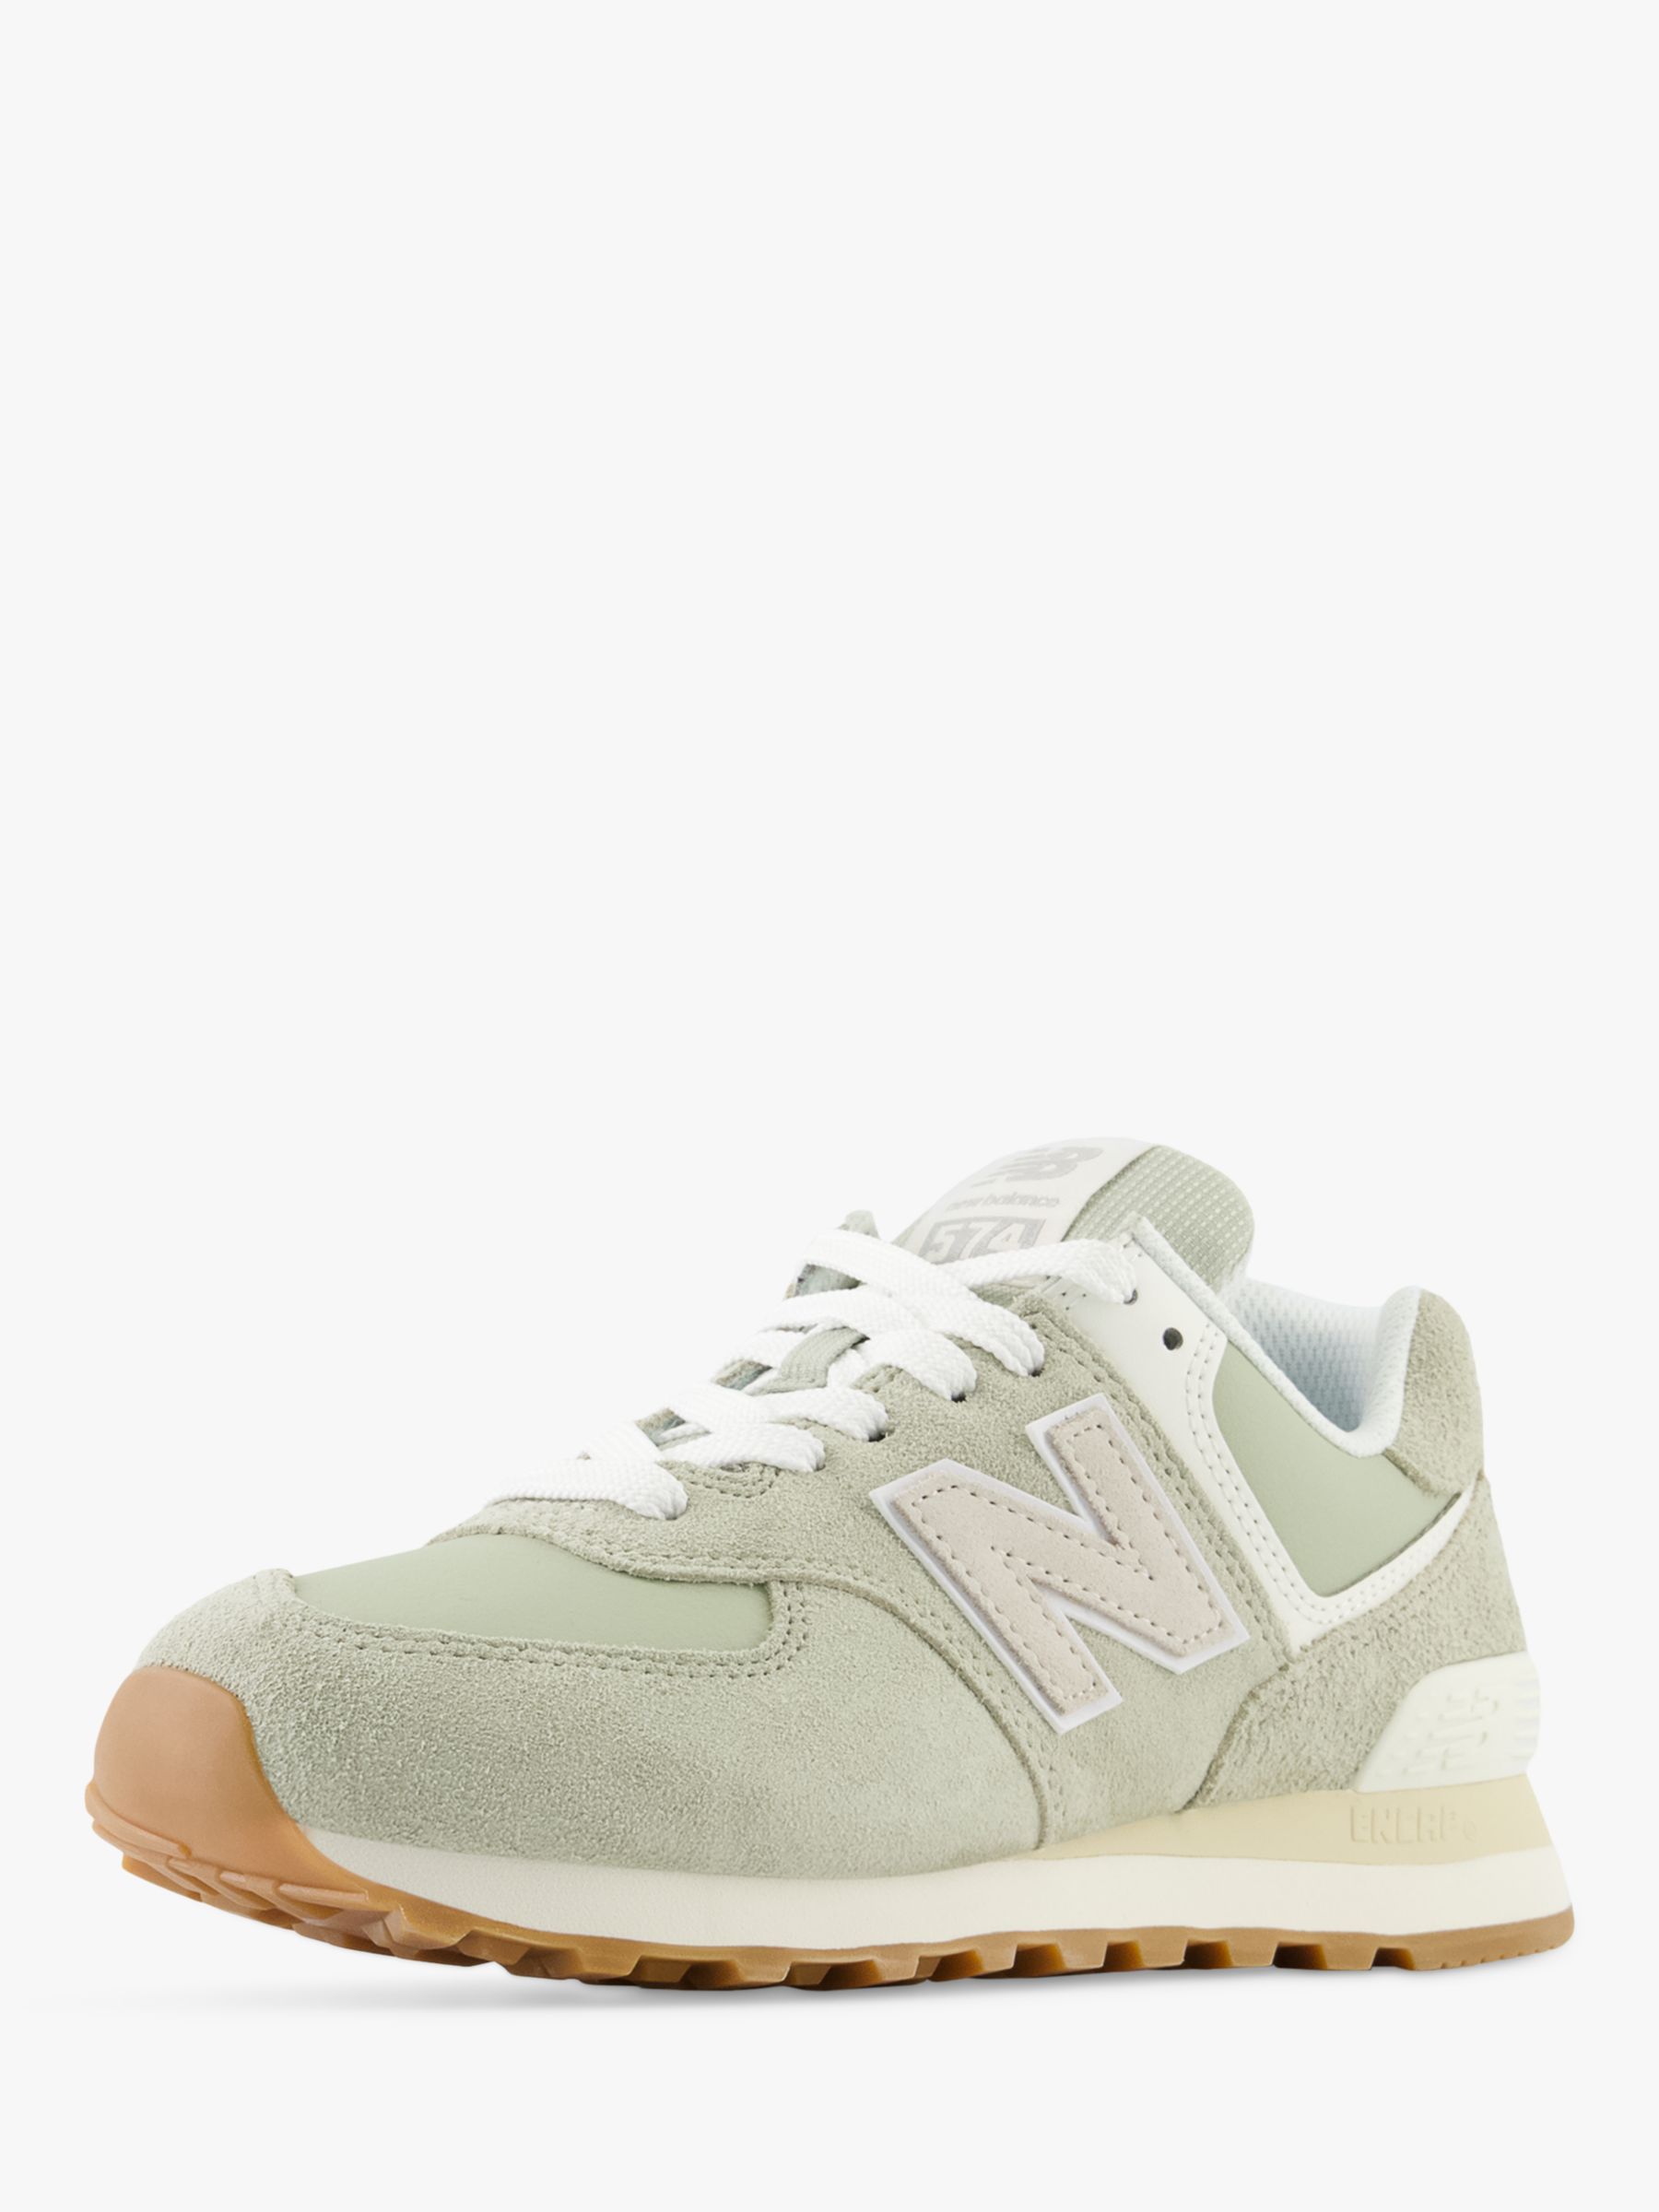 New Balance 574 Suede Mesh Trainers, Olivine at John Lewis & Partners